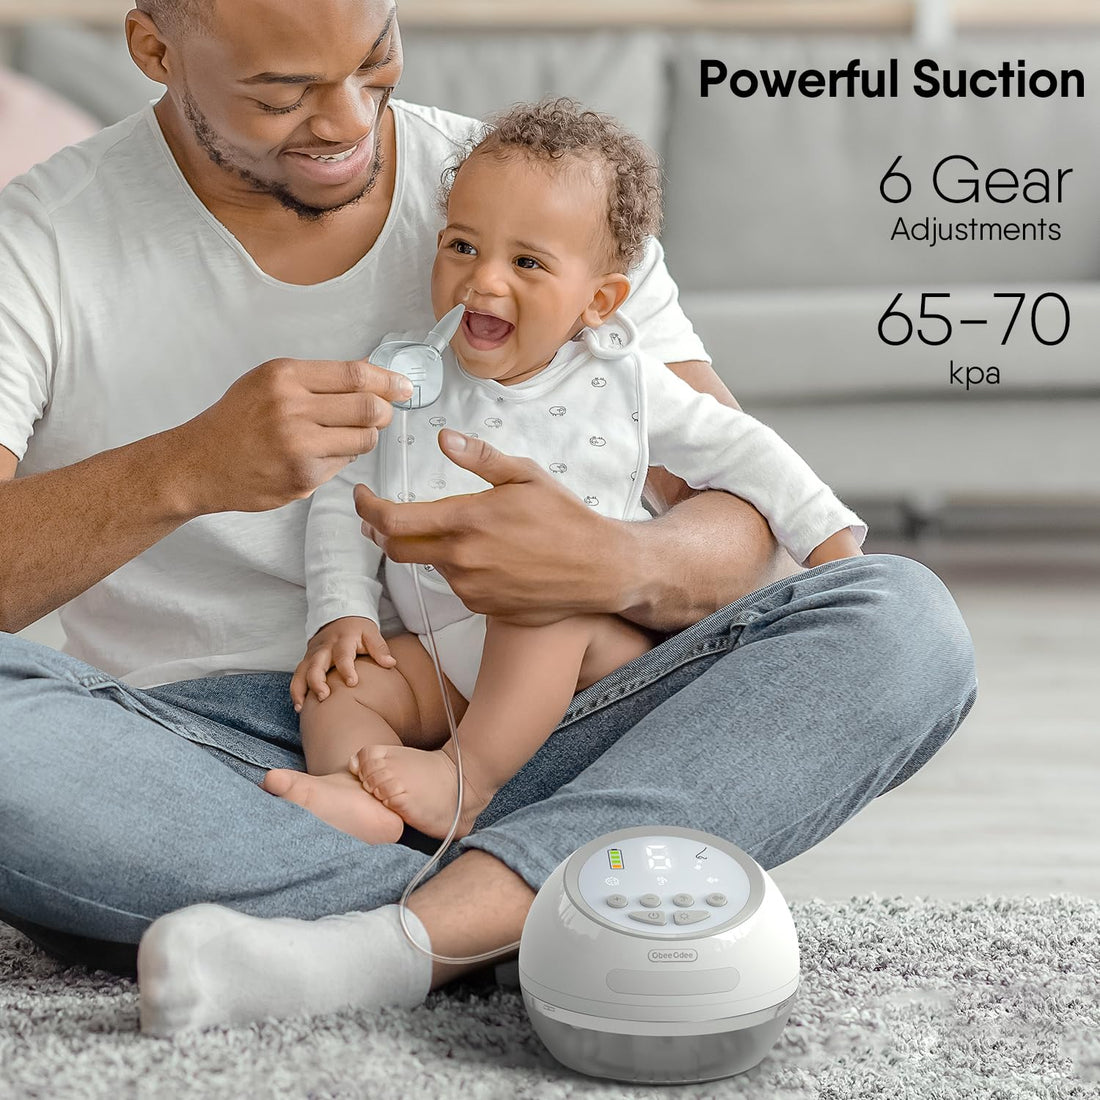 Obee Odee Electric Nasal Aspirator for Baby with 6 Level Suction, Baby Nose Sucker, Rechargeable Baby Snot Cleaner with 6 Music White Noise 3 Night Light for Infants Kids Toddlers Grey